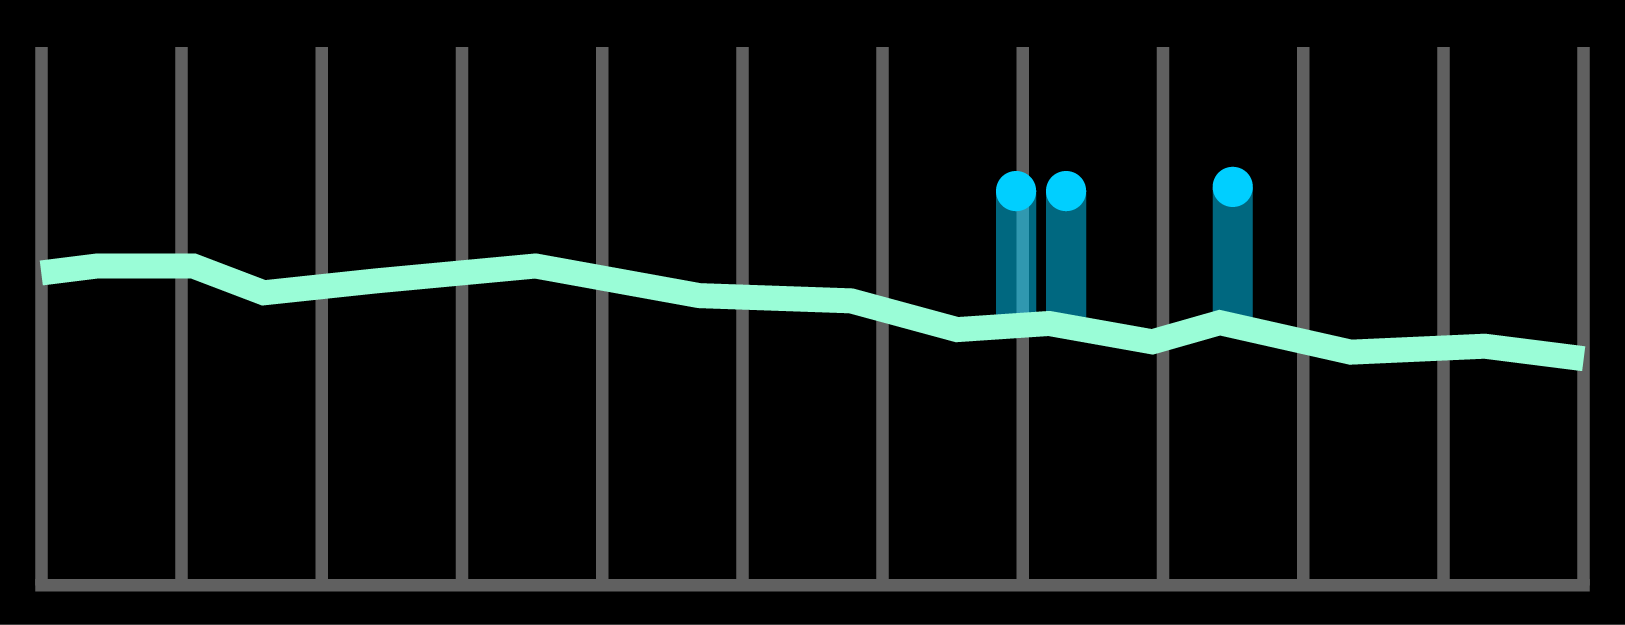 BREATHING RATE GRAPH